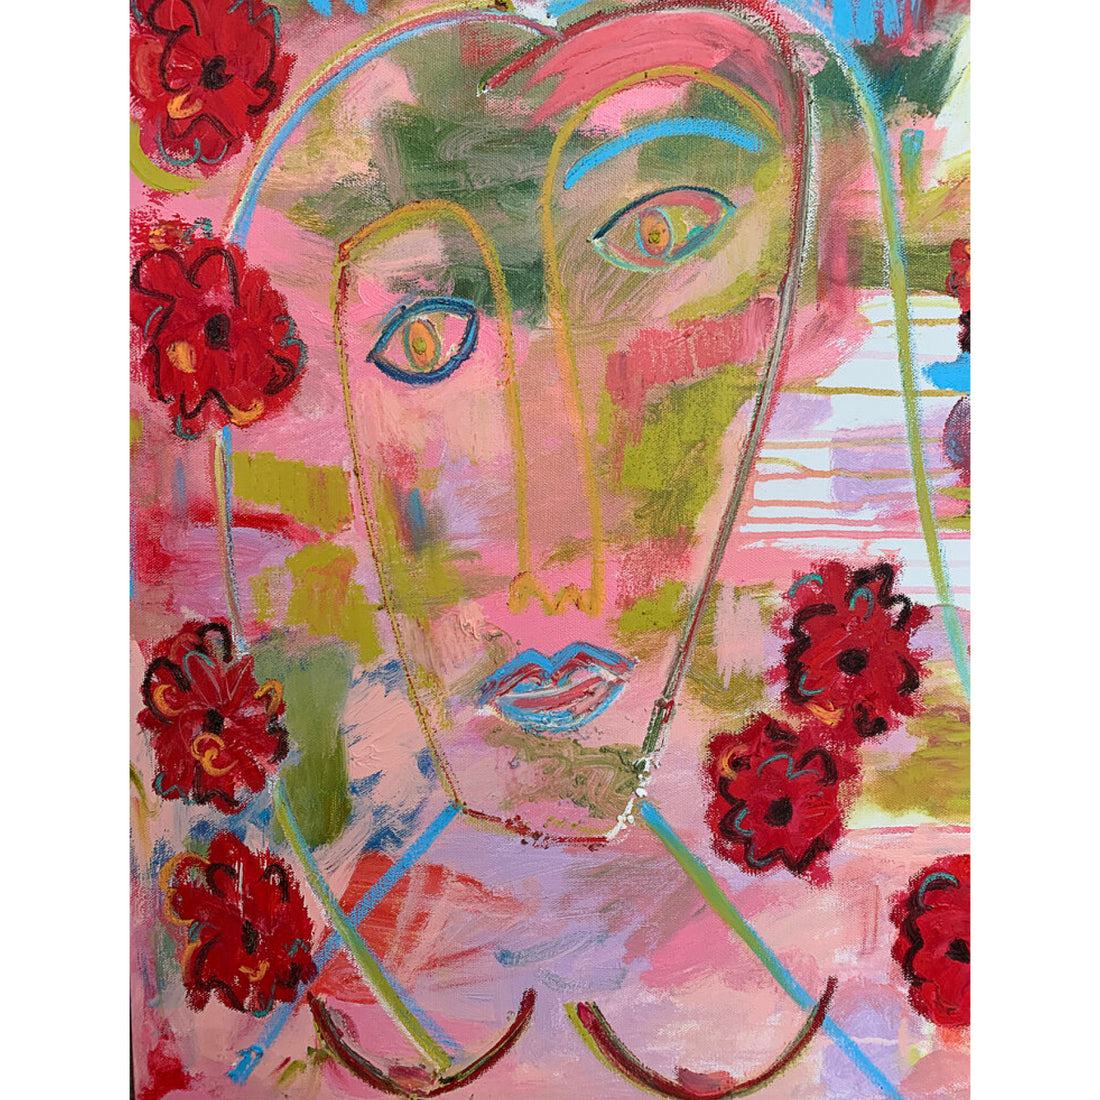 Monica Shulman "Self-Portrait with Poppies" abstract figurative painting American Artist Kefi Art Gallery